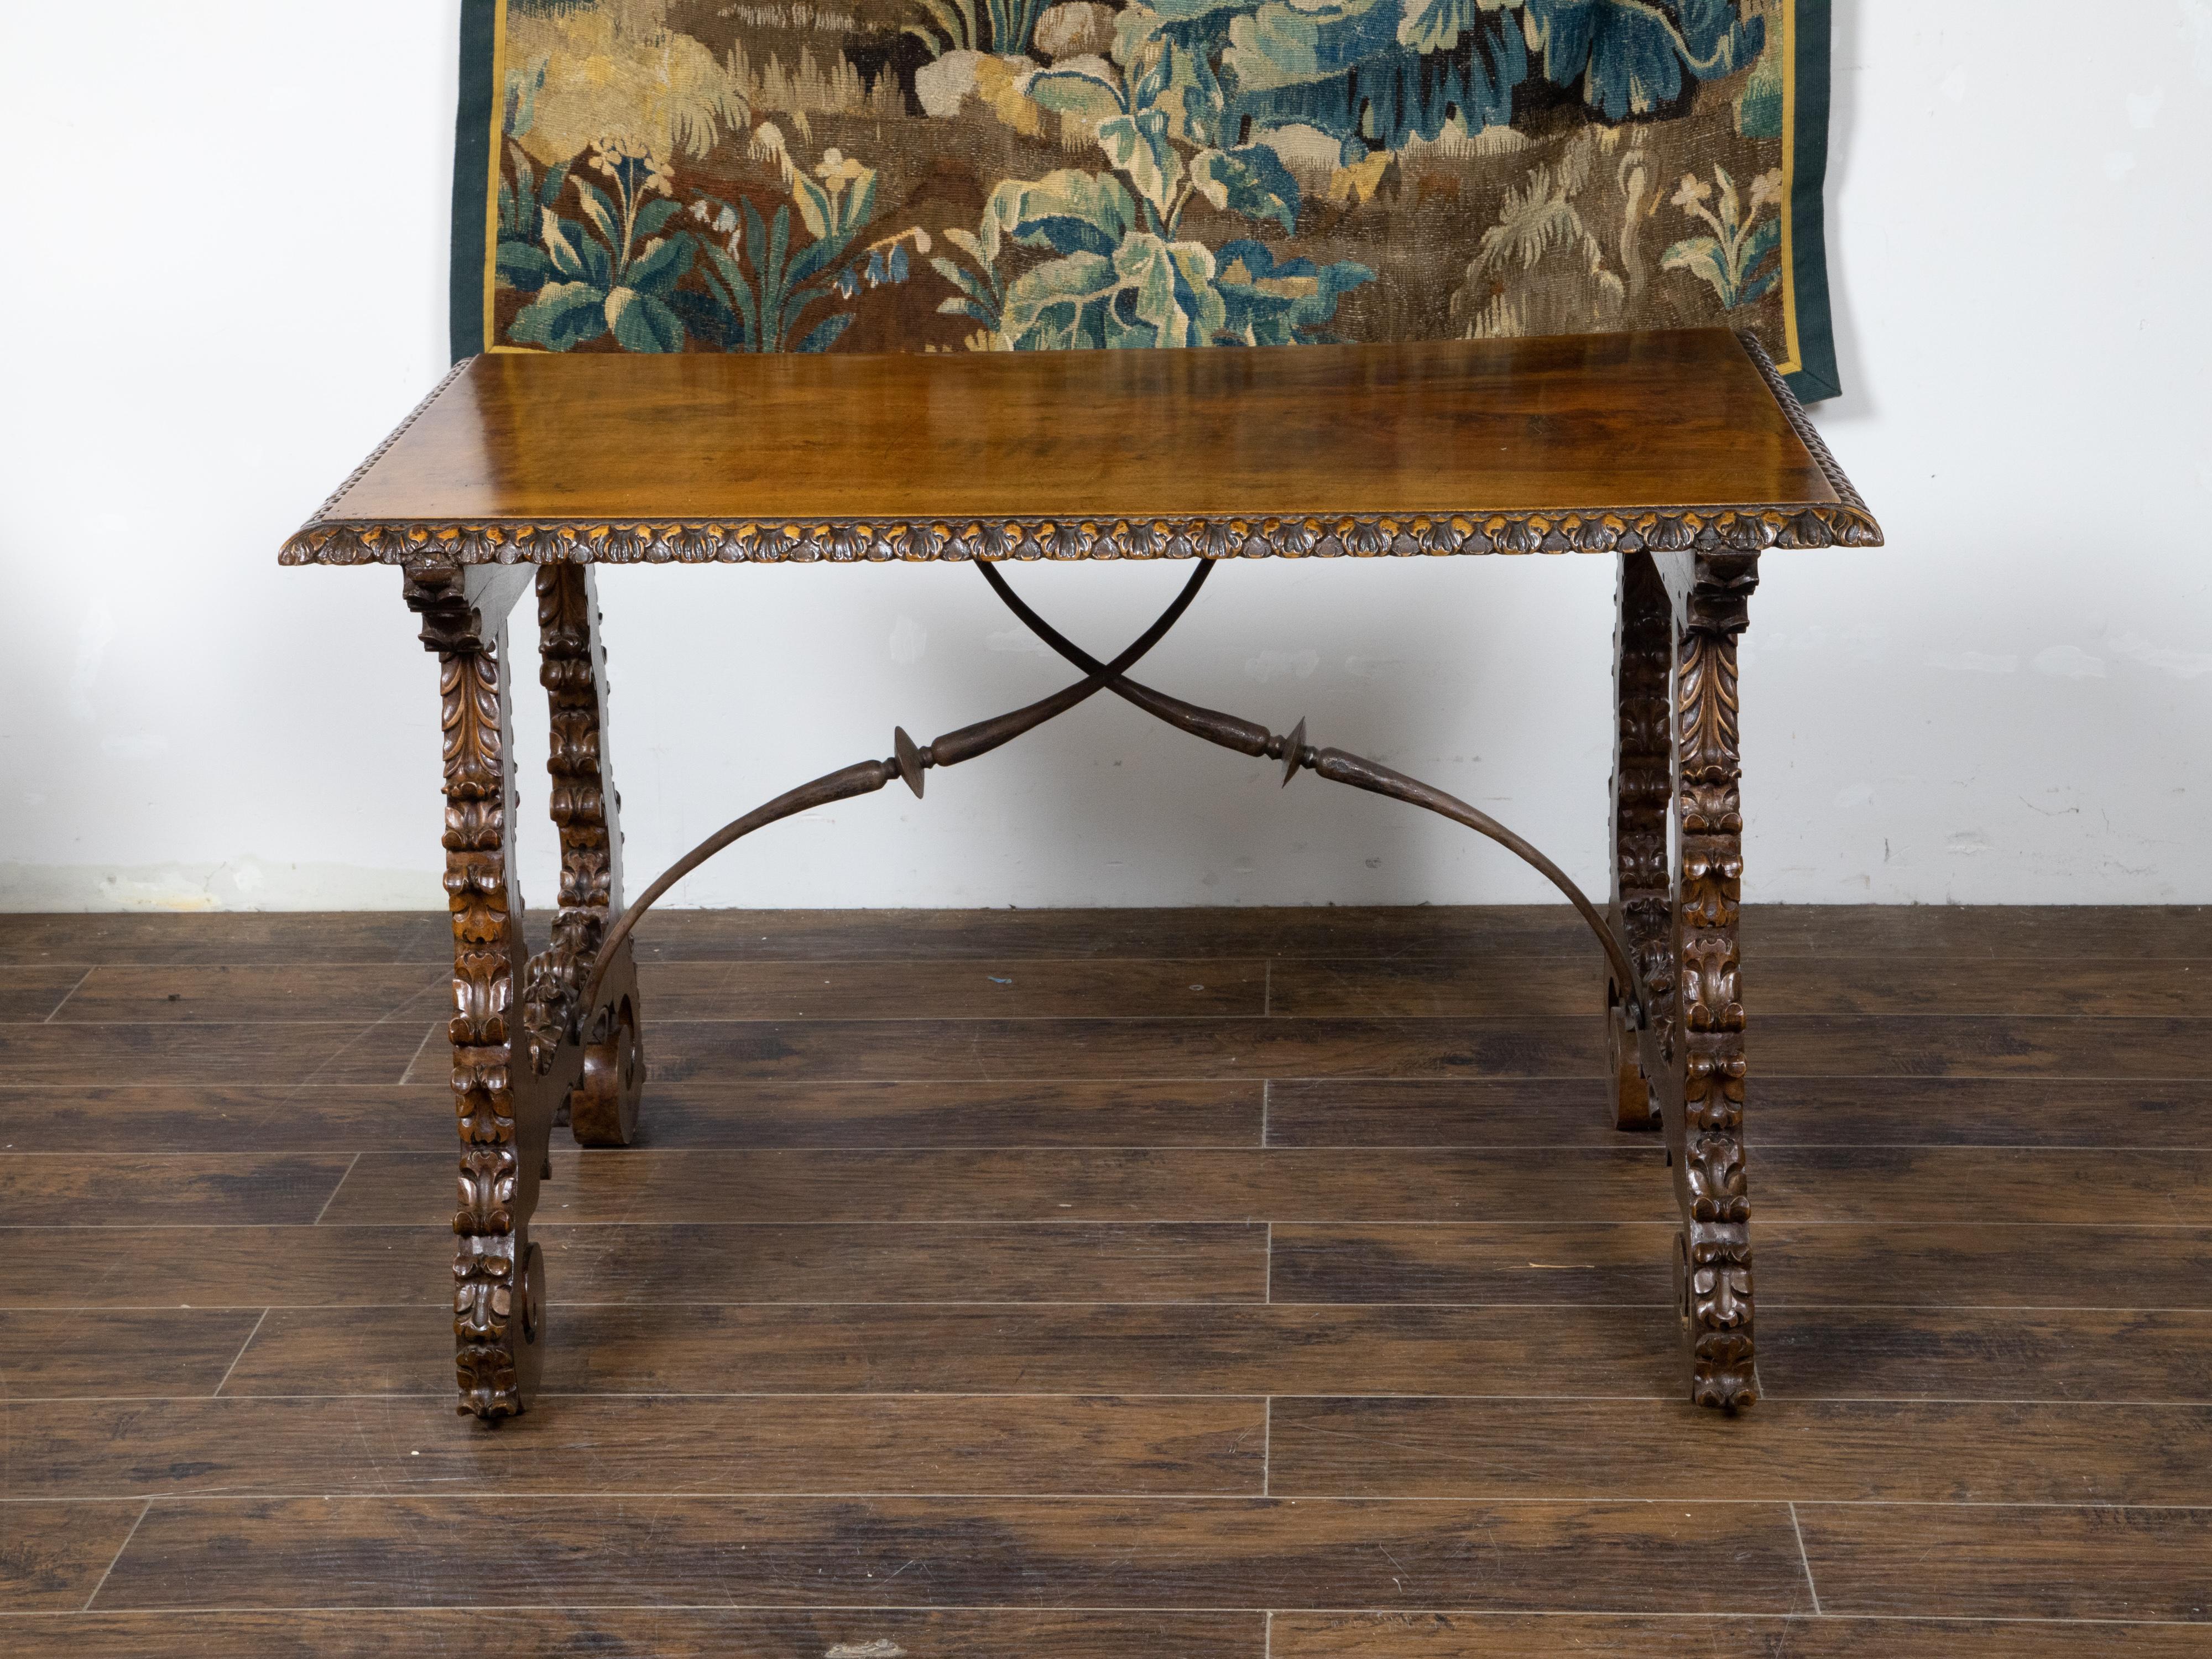 An Italian Baroque style walnut Fratino console table from the 19th century, with carved lyre-shaped trestle base, scrolling foliage motifs, iron stretchers, carved feet and brown patina. Created in Italy during the 19th century, this Baroque walnut